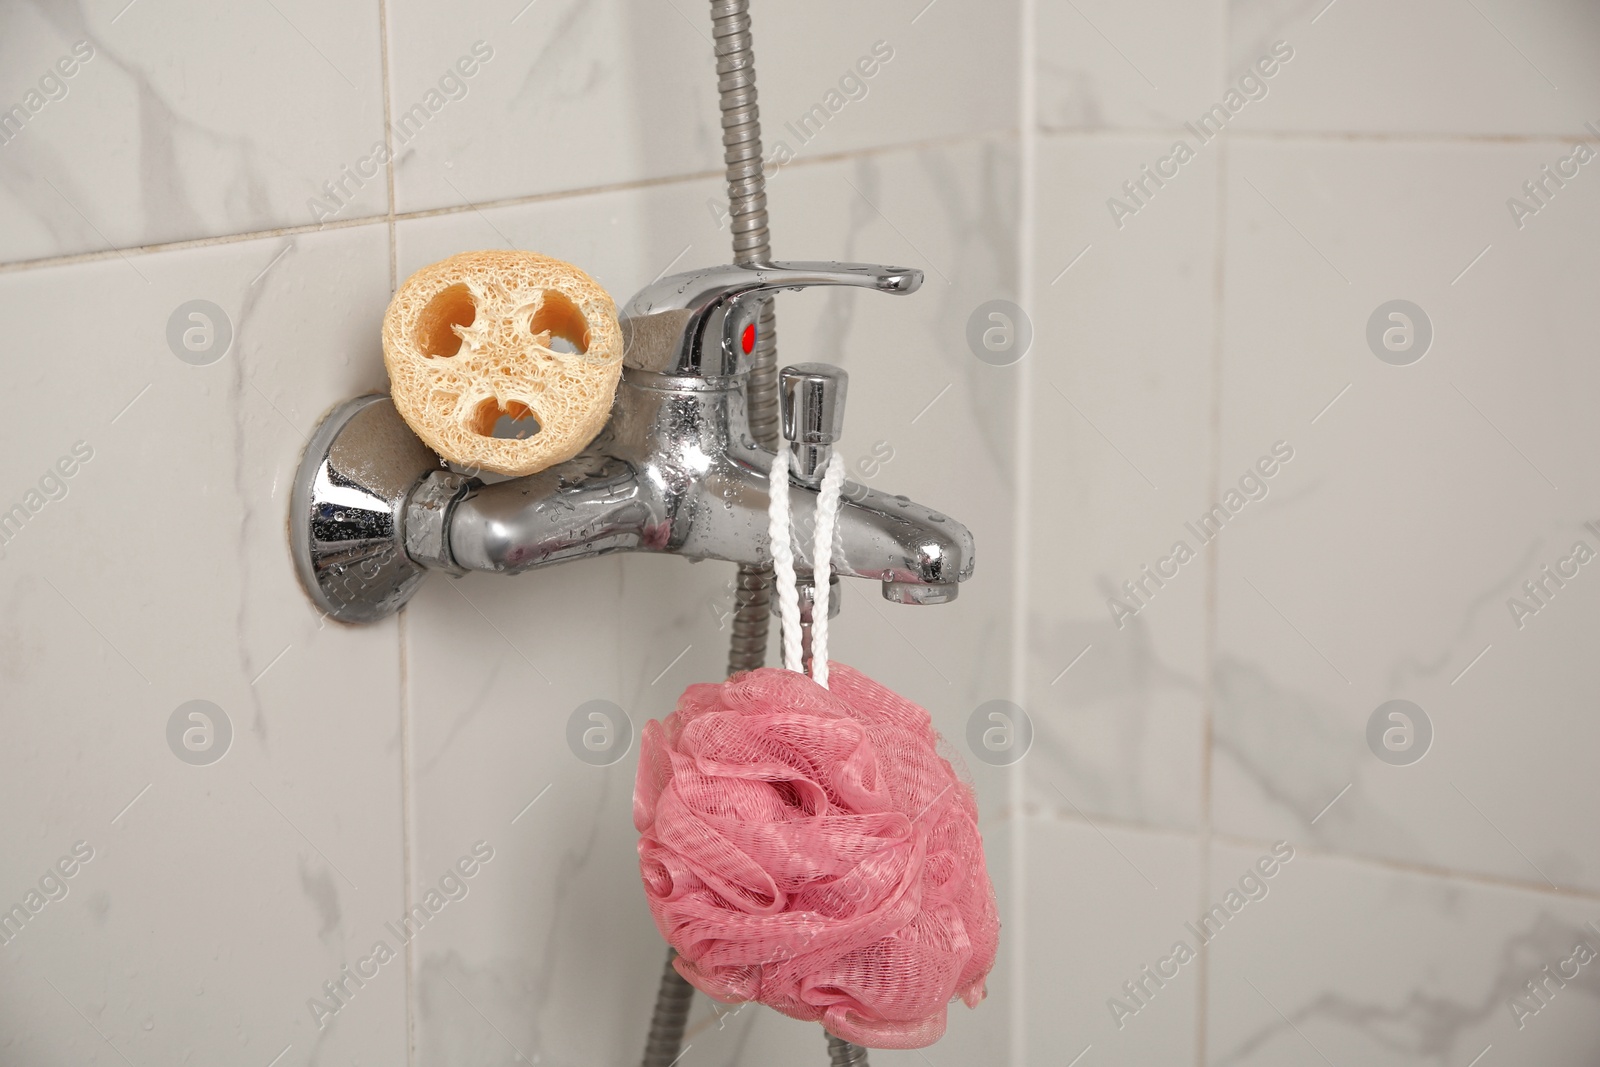 Photo of Different sponges on faucet in bathroom, space for text